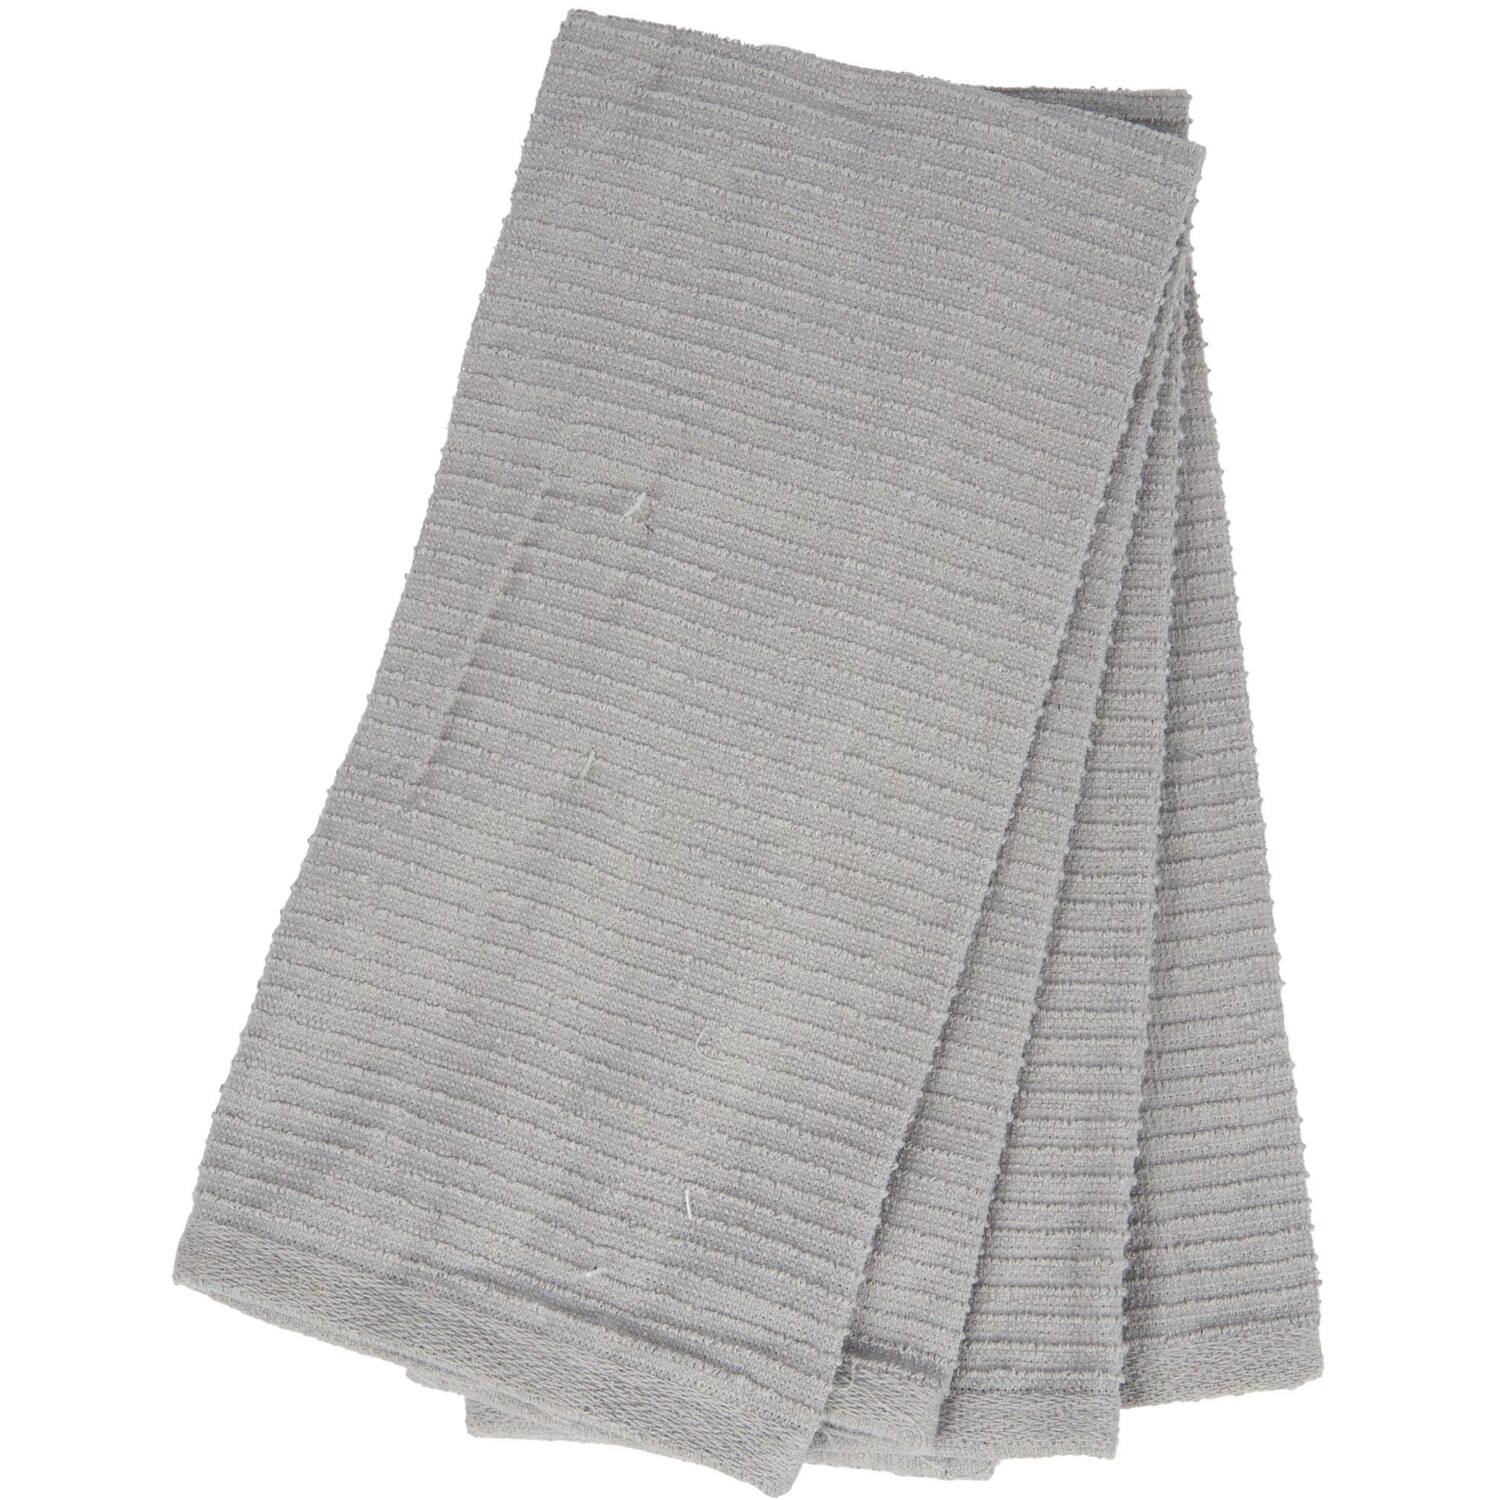 Pack of 2 Essentials Ribbed Terry Tea Towels - Grey Image 1